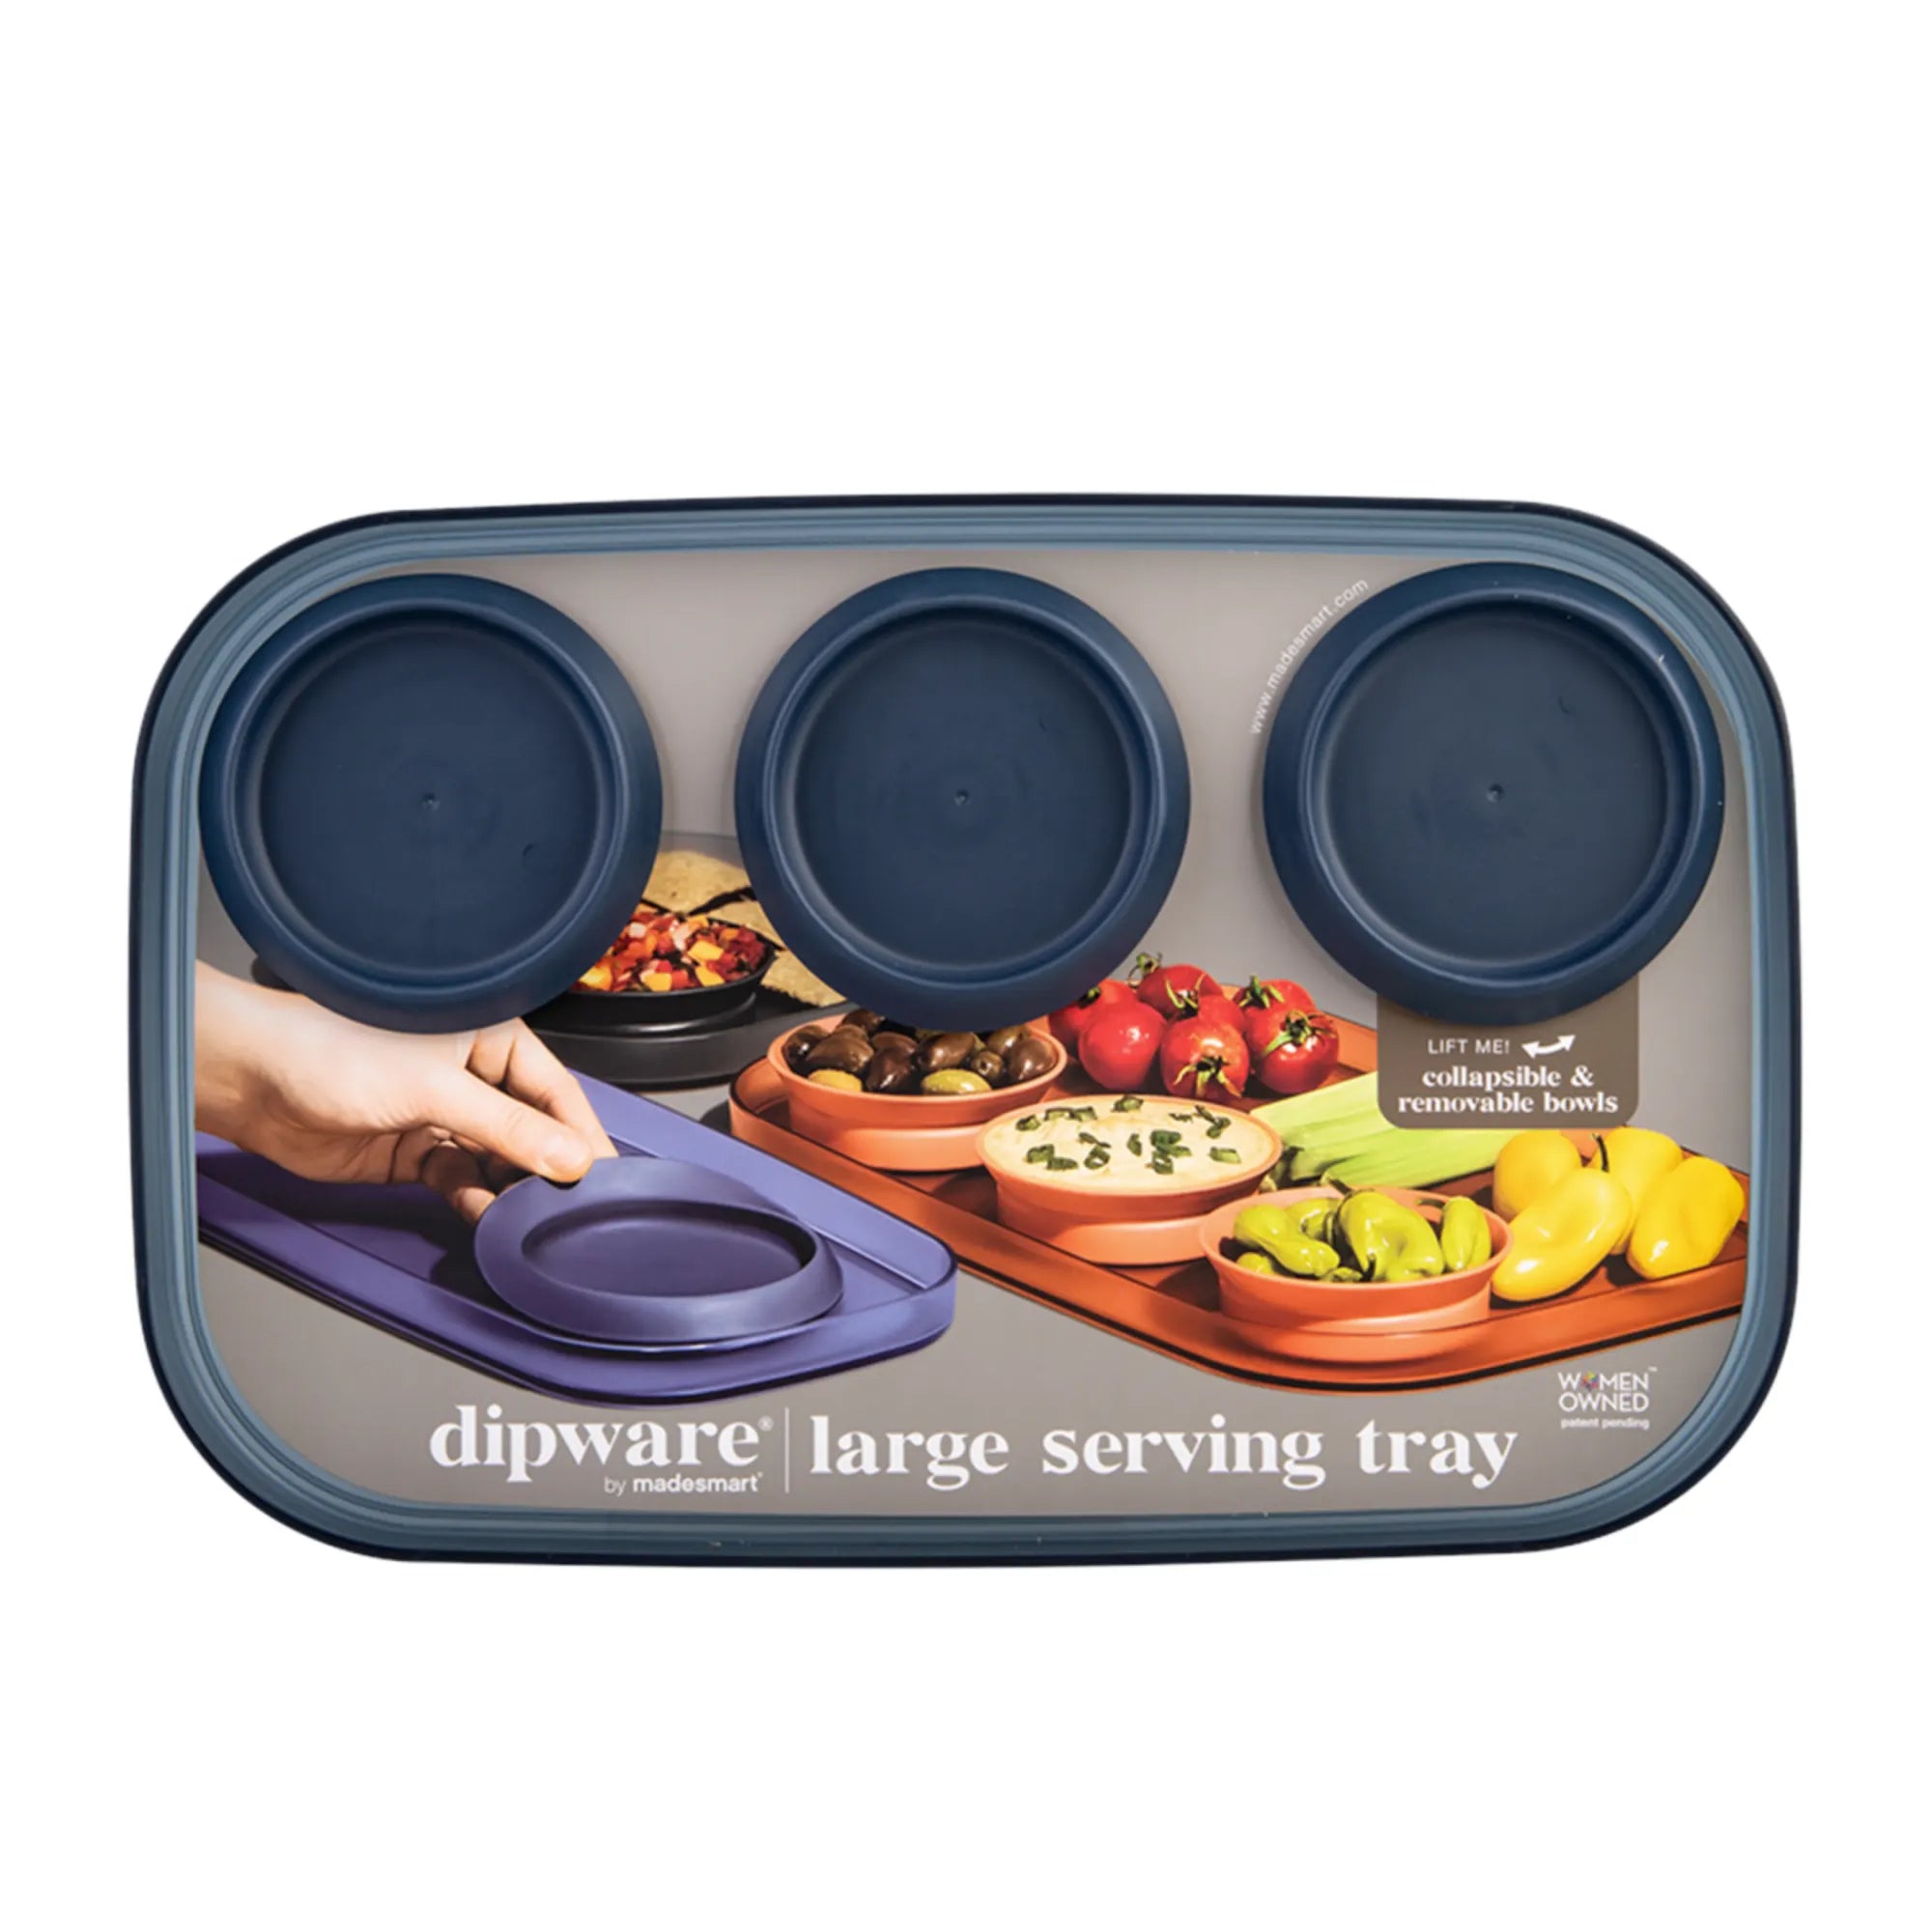 Madesmart® Dipware® Large Serving Tray With 3 Bowls - 39x25cm - Midnight Blue